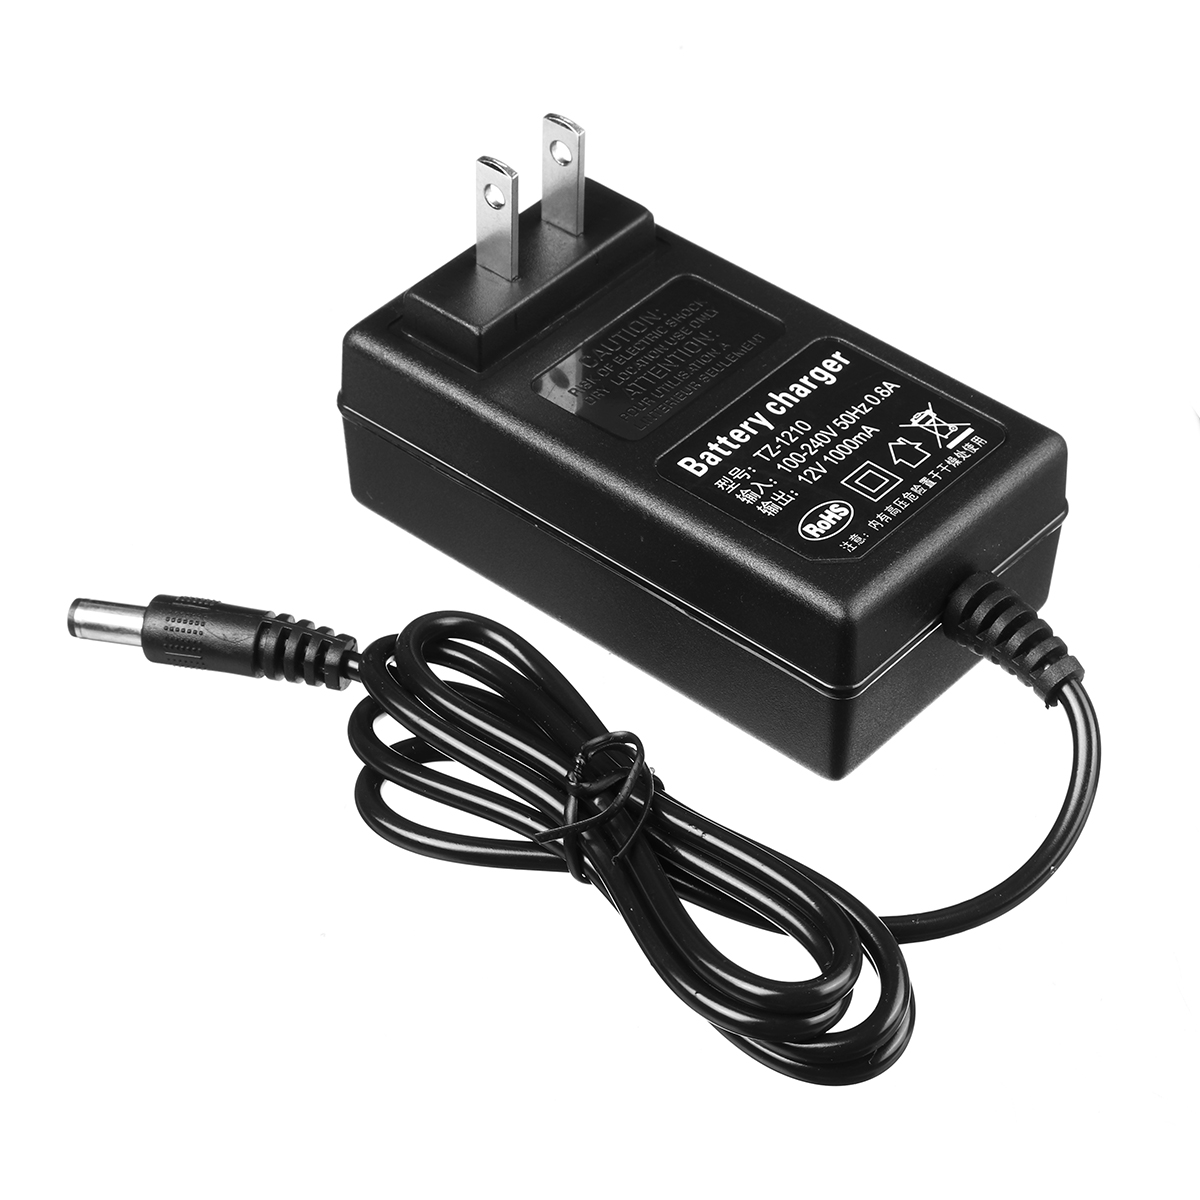 AC-100V-240V-50Hz-06A-Input-12V-1000mAh-Output-Battery-Charger-for-Makita-Electric-Drill-General-Bat-1794719-4